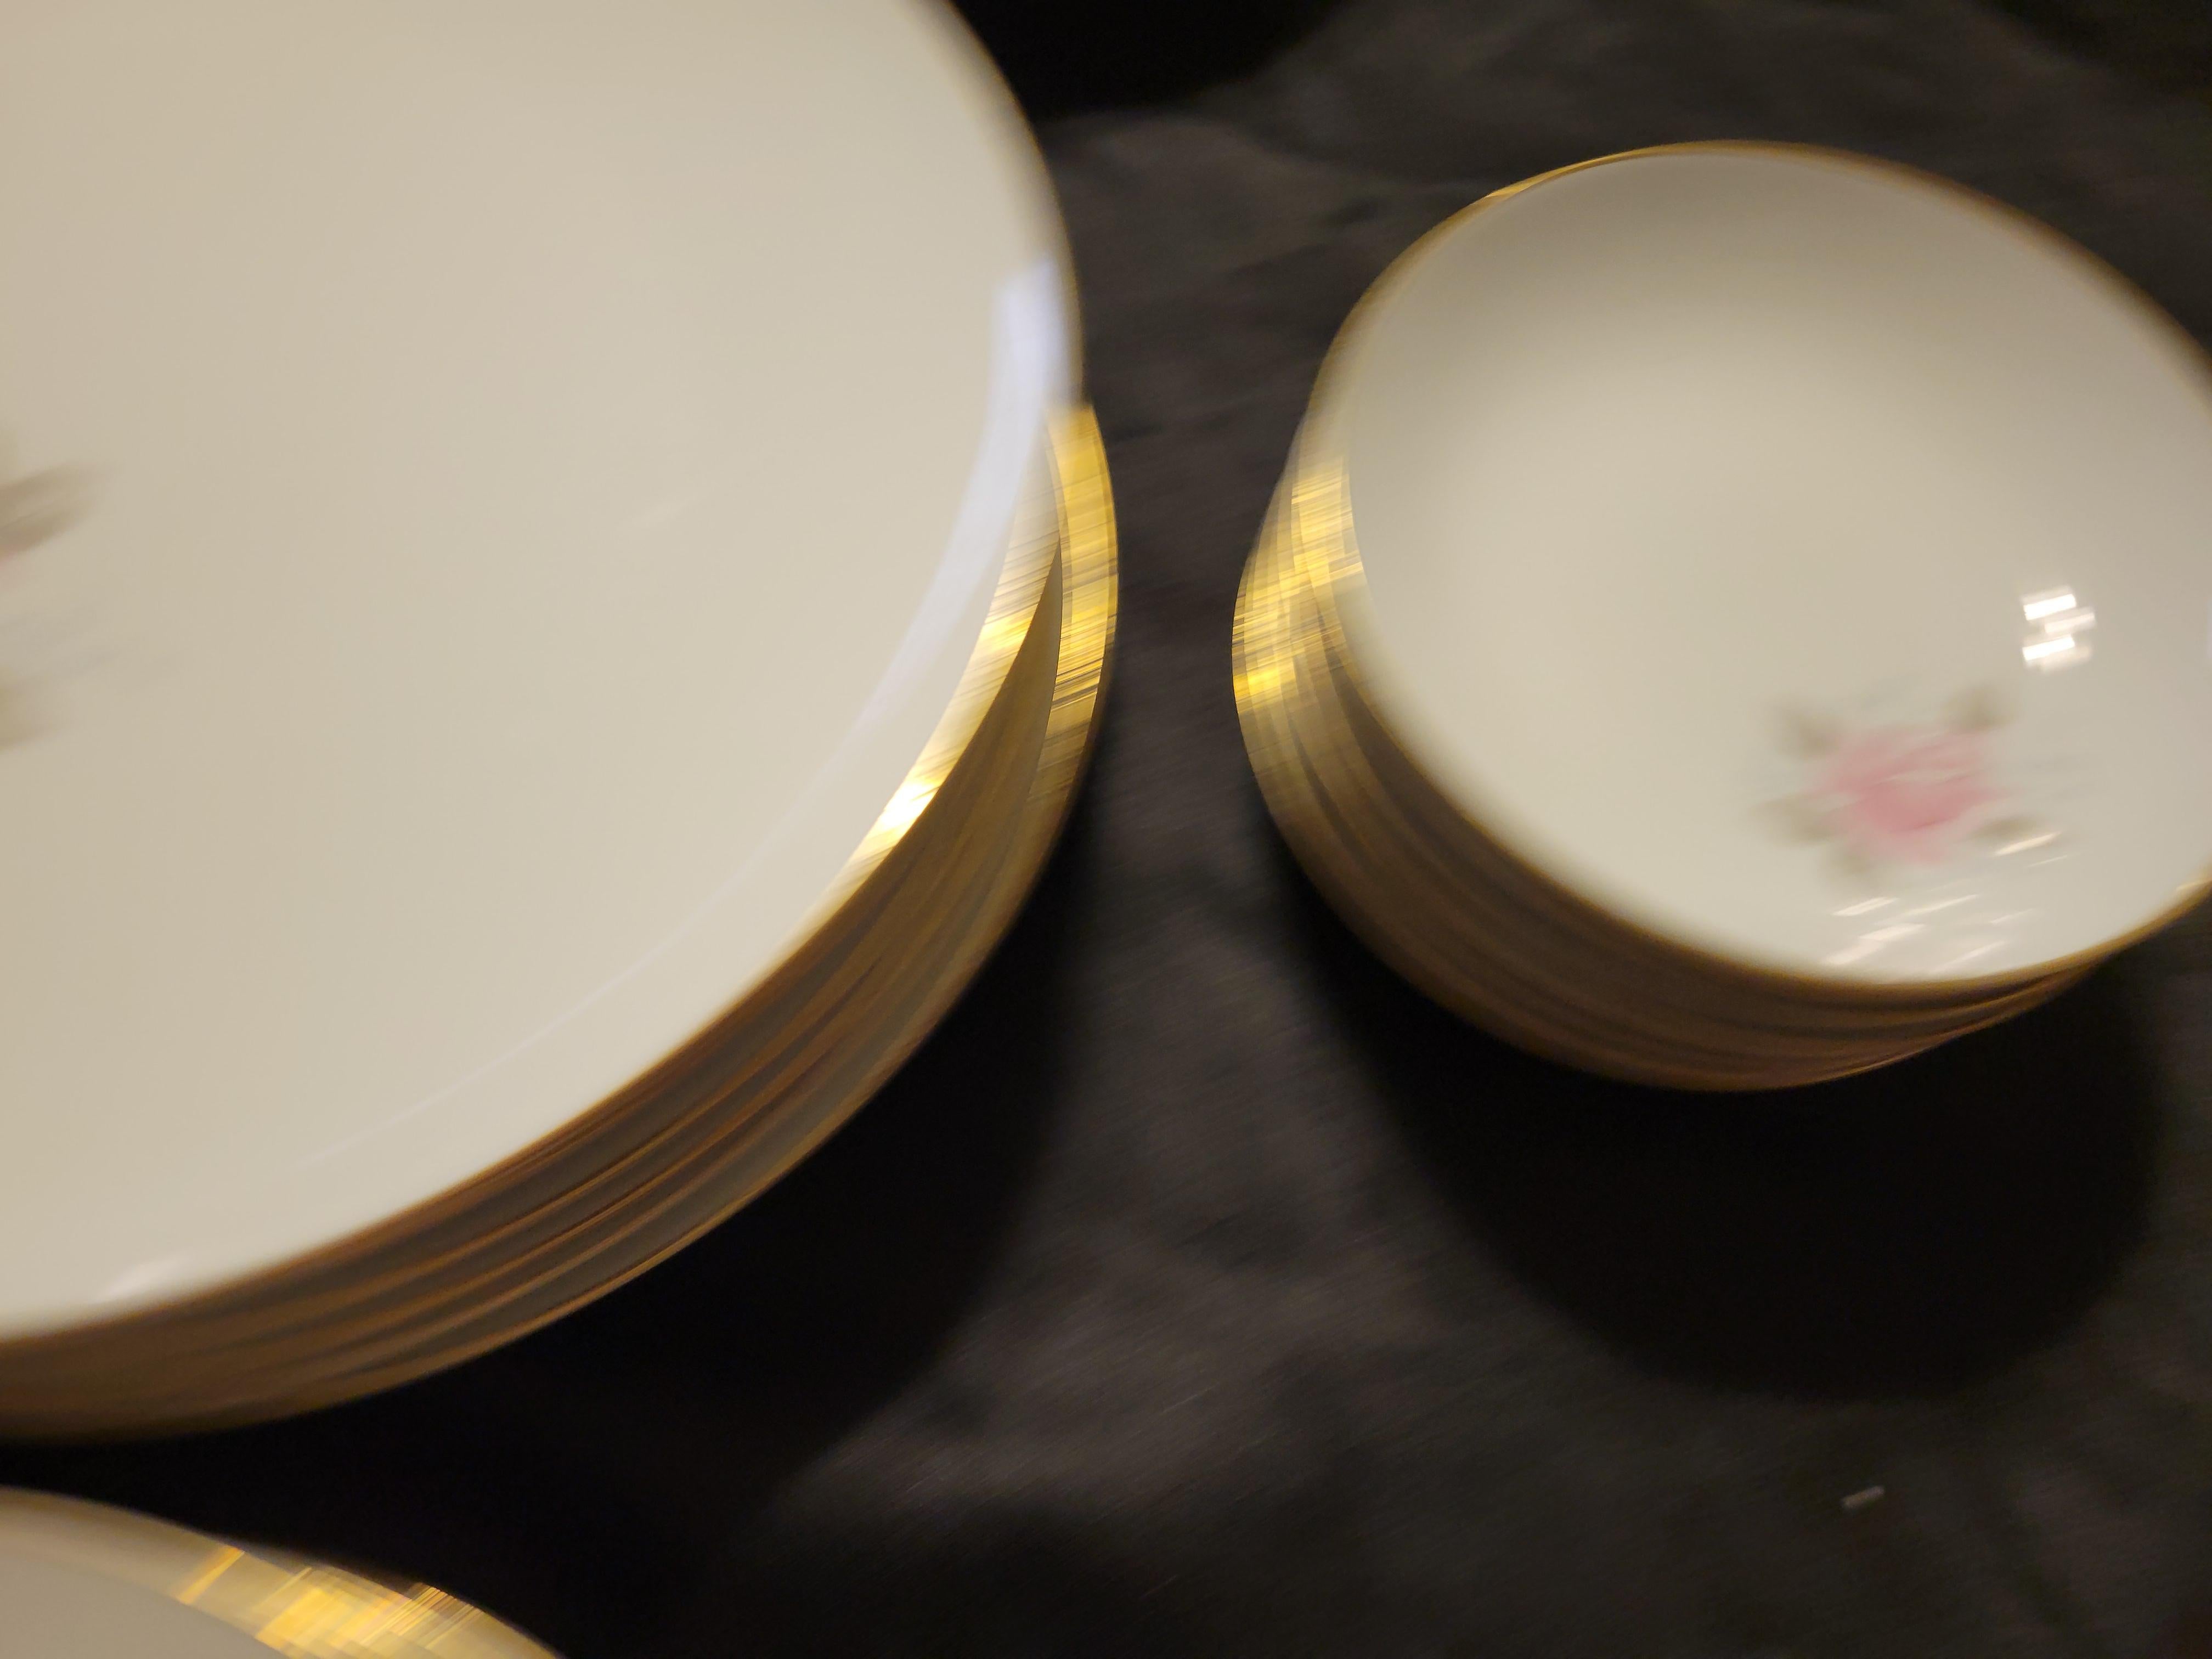 Vintage Noritake 'Roseville' Fine China Dining Set for 8 (79 Items)  In Excellent Condition For Sale In Phoenix, AZ